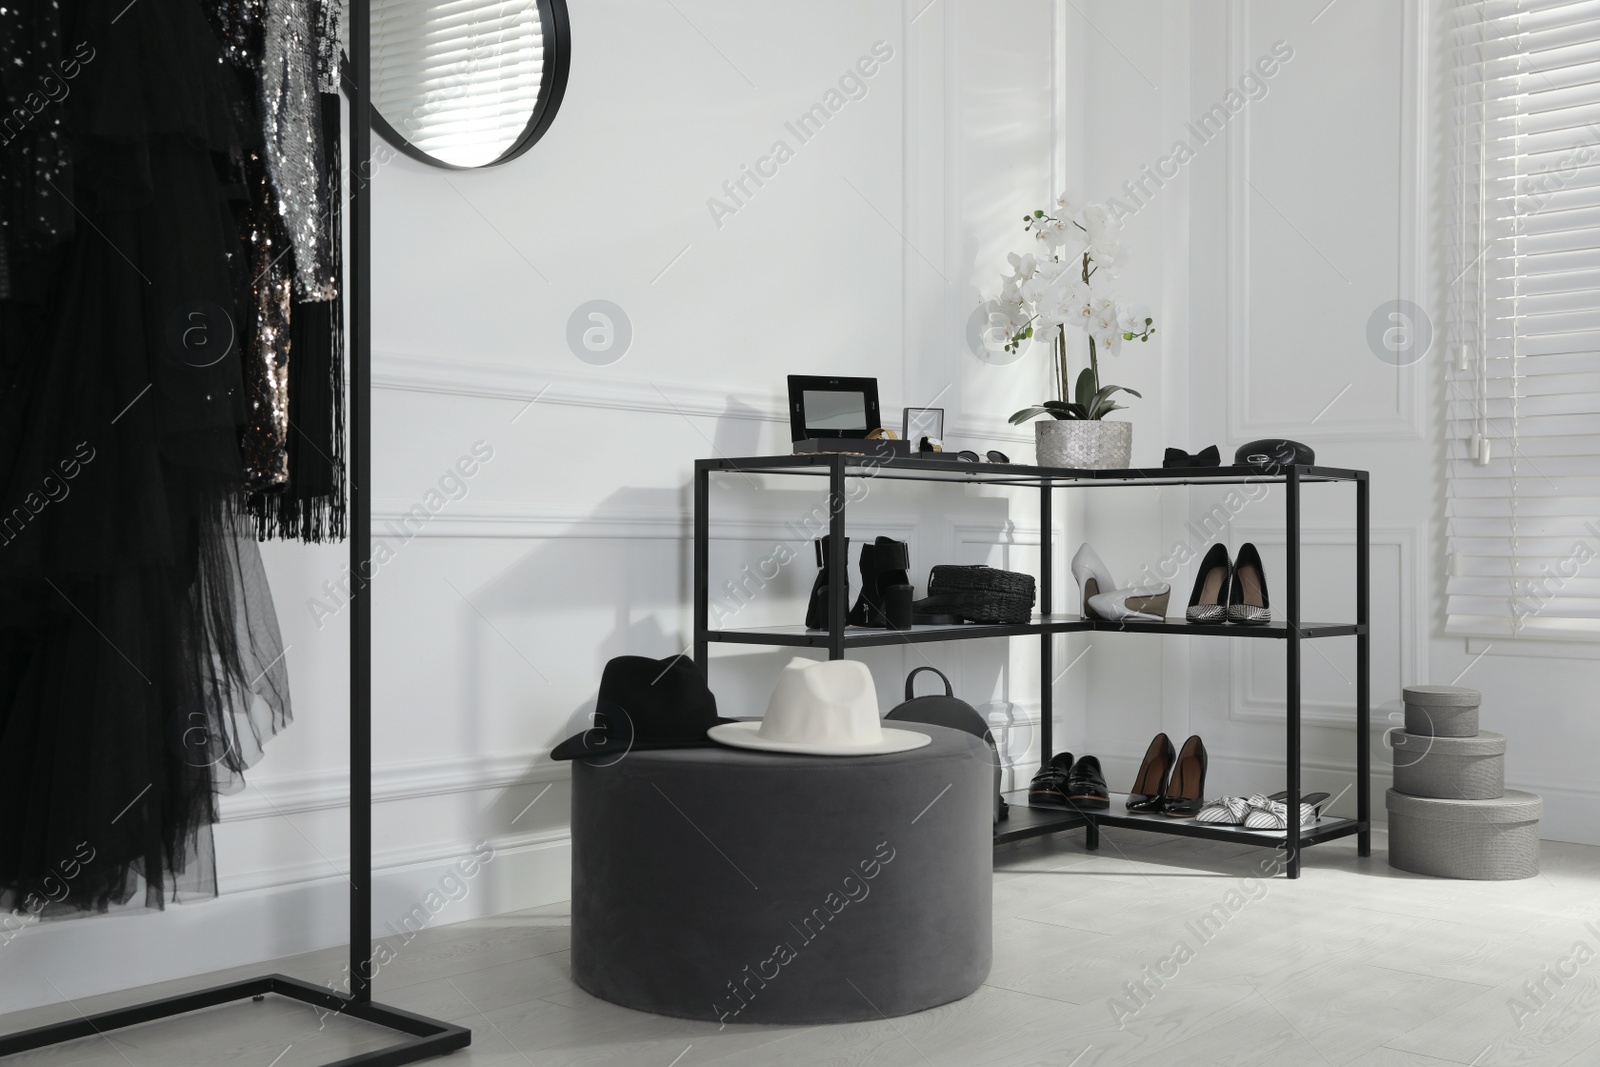 Photo of Shelving unit with stylish women's shoes, clothes and accessories in dressing room